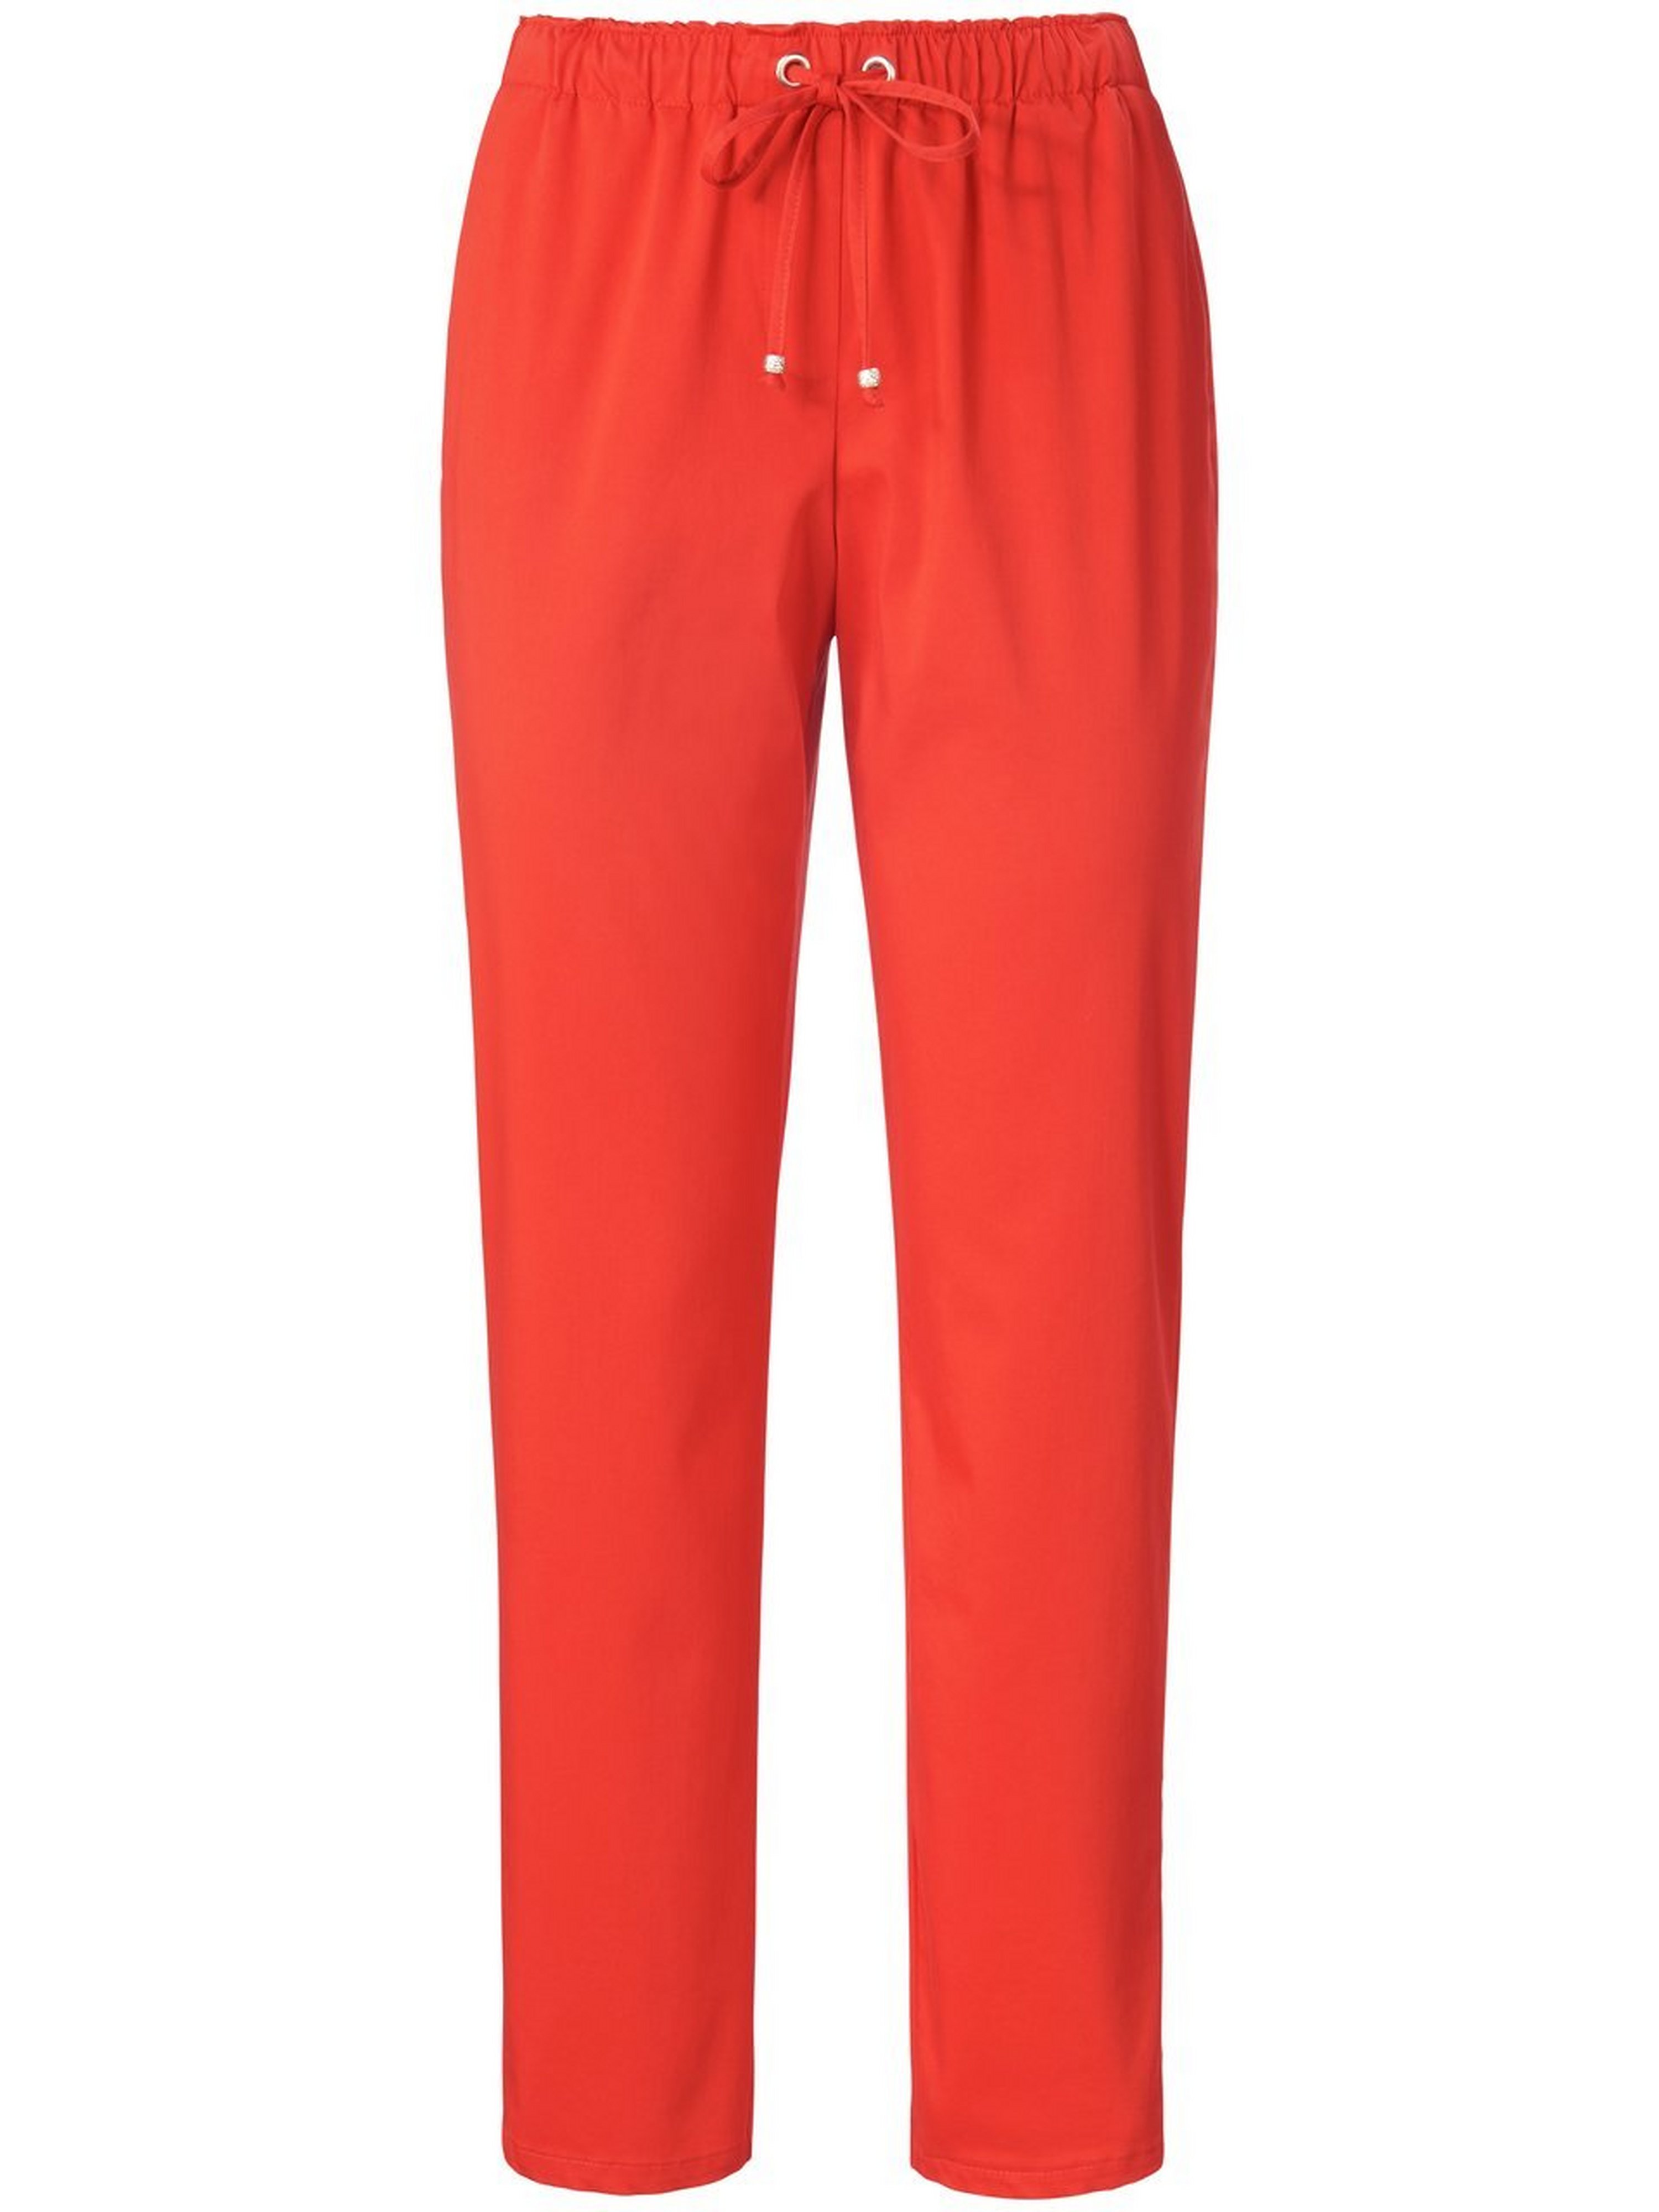 Le jogg-pant coupe Barbara  Peter Hahn rouge